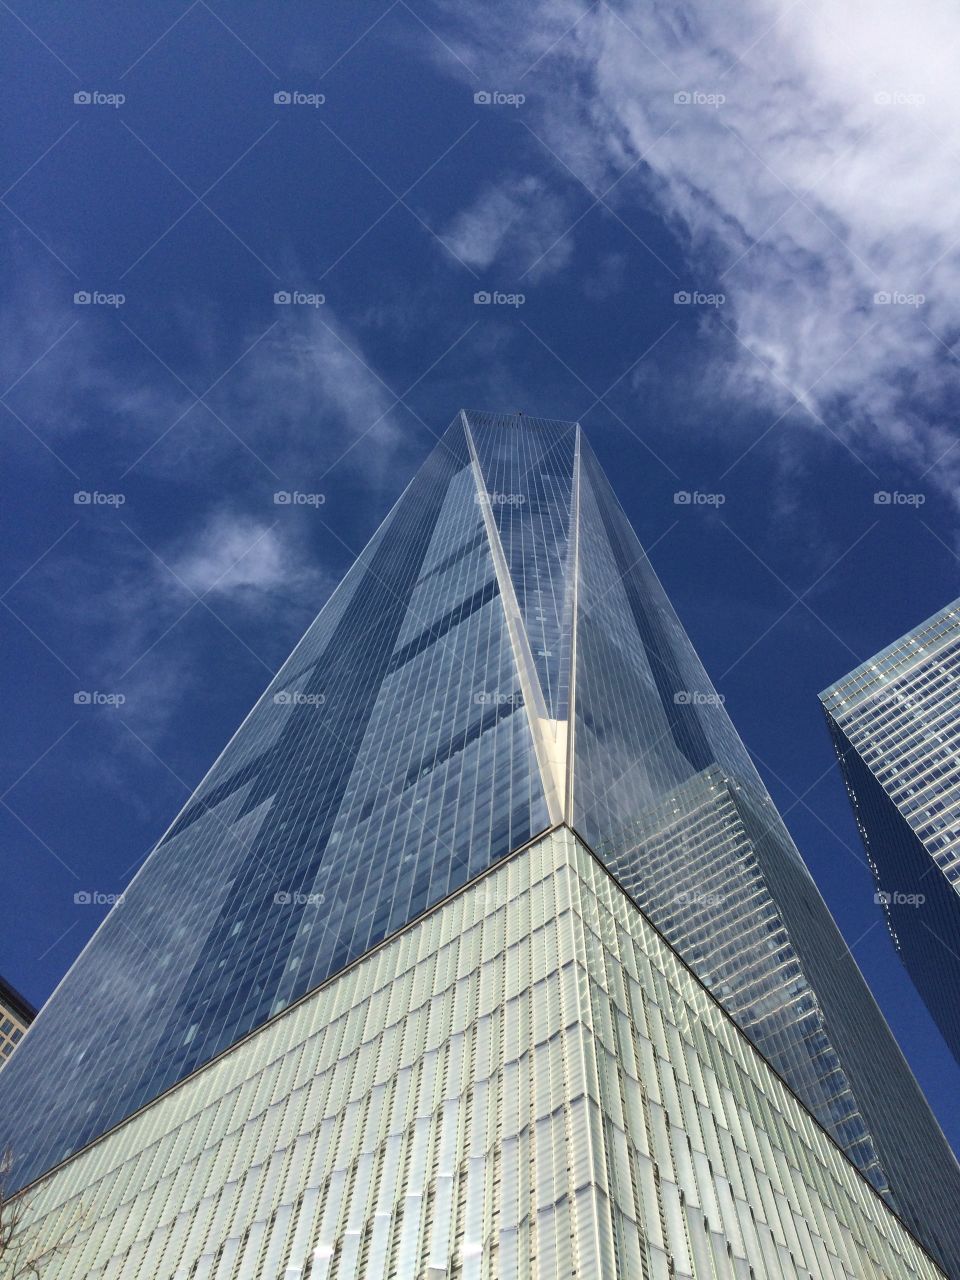 Beautiful view looking up at One World Trade Center, New York City, New York